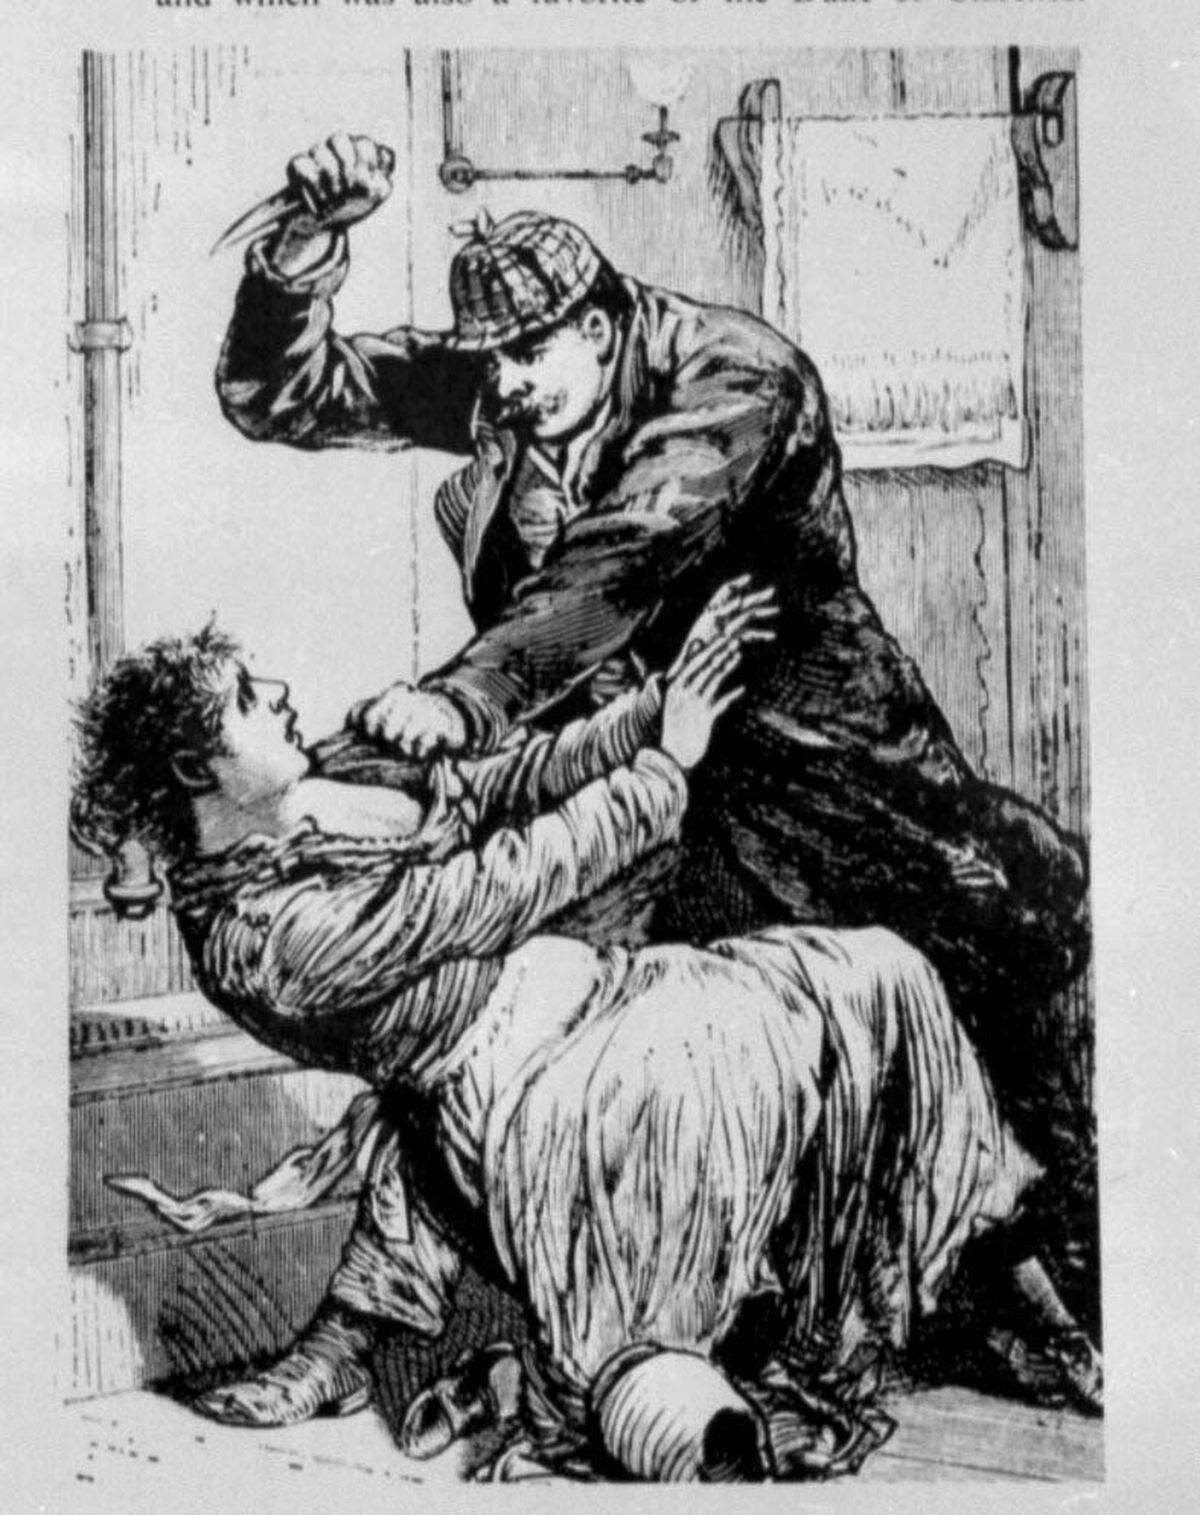 Catherine Eddowes fell victim to Jack the Ripper on the streets of London